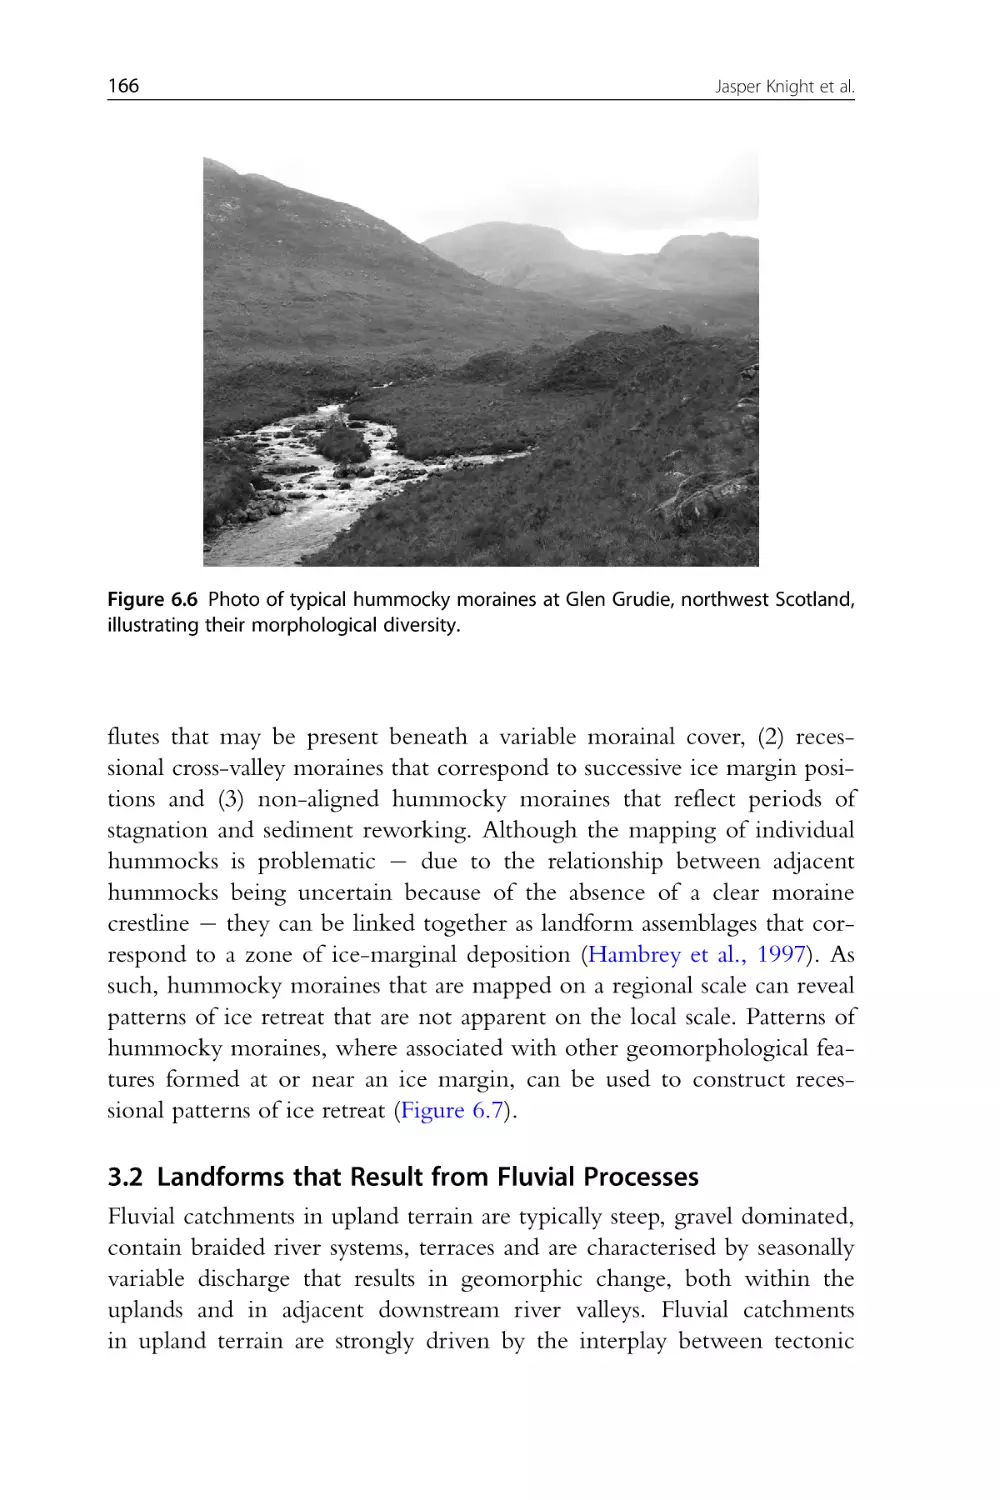 3.2 Landforms that Result from Fluvial Processes